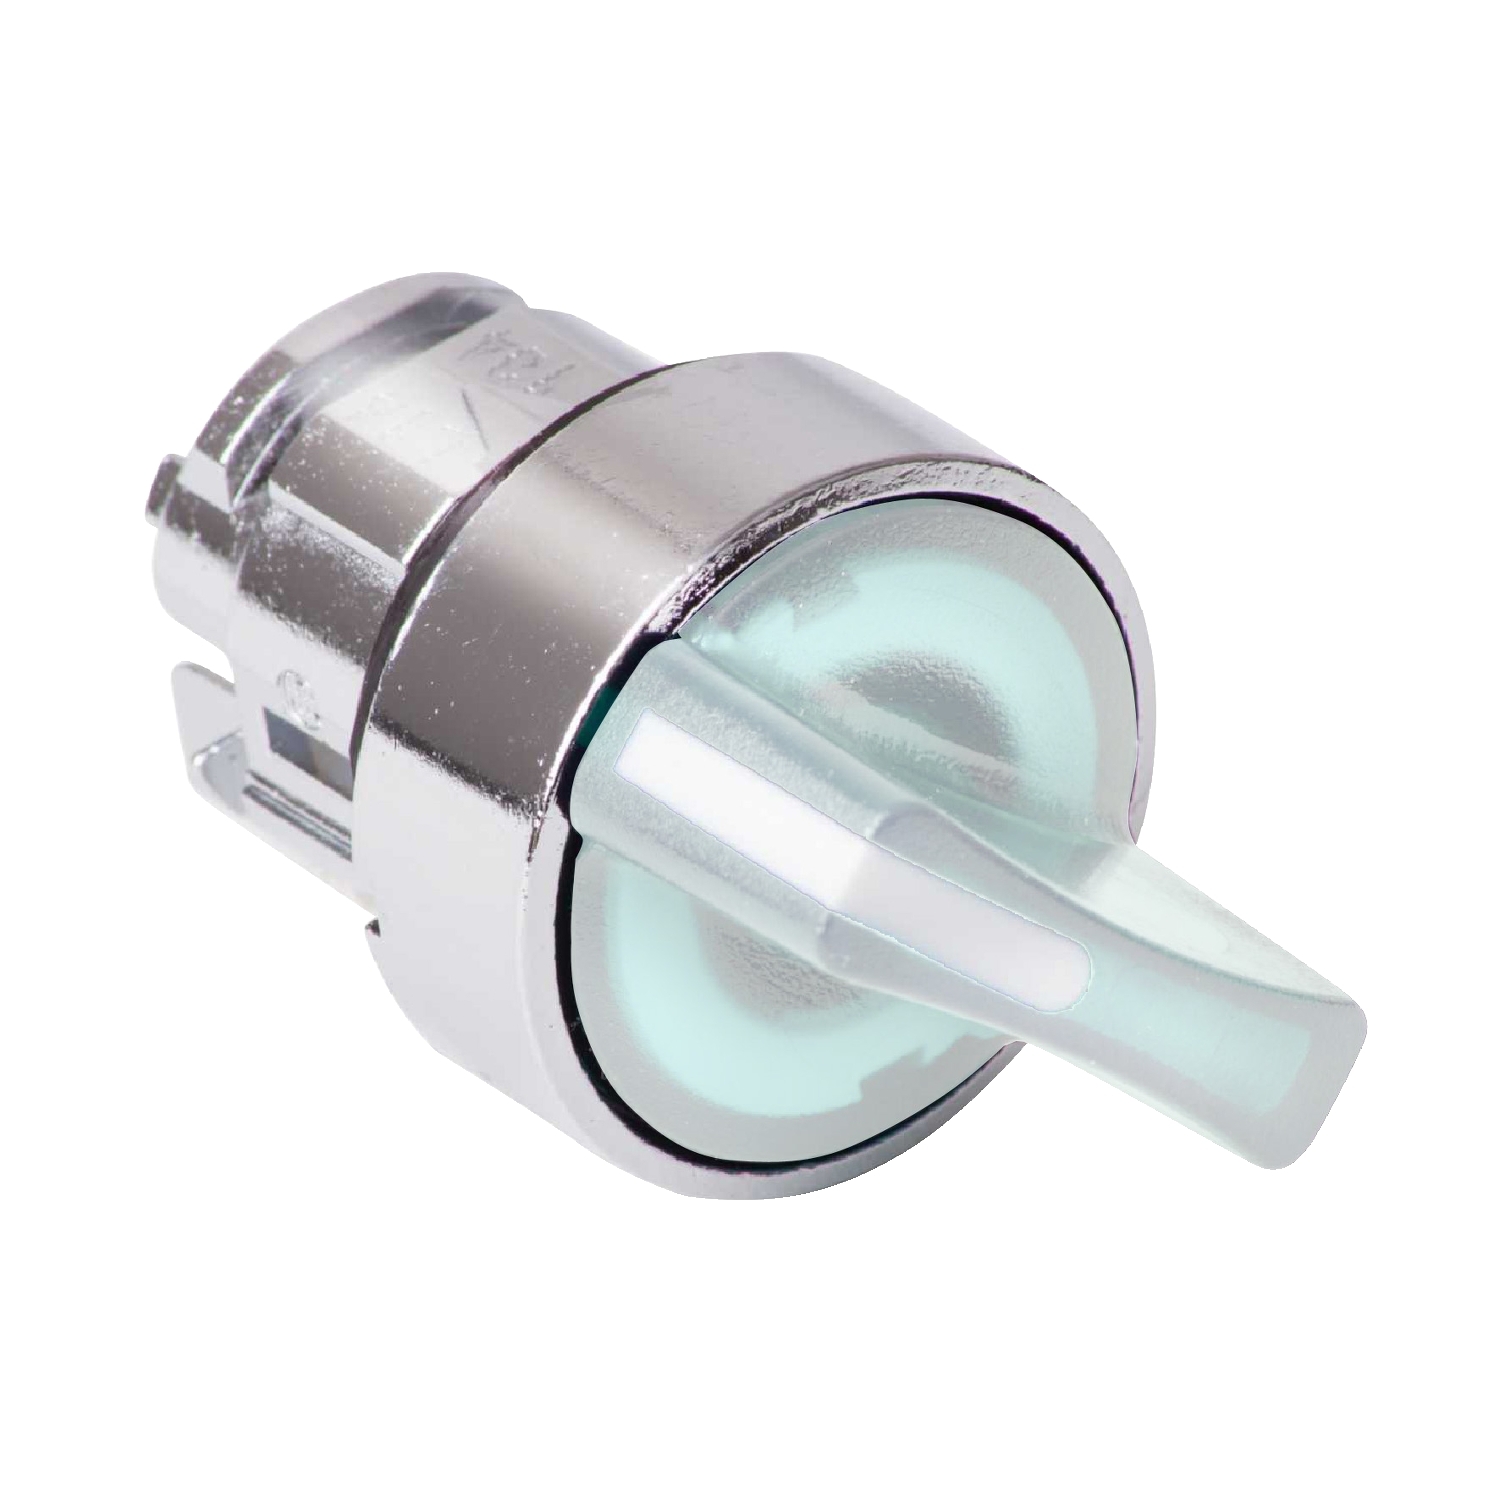 Head for illuminated selector switch, Harmony XB4, metal, white handle, 22mm, universal LED, 2 positions, stay put